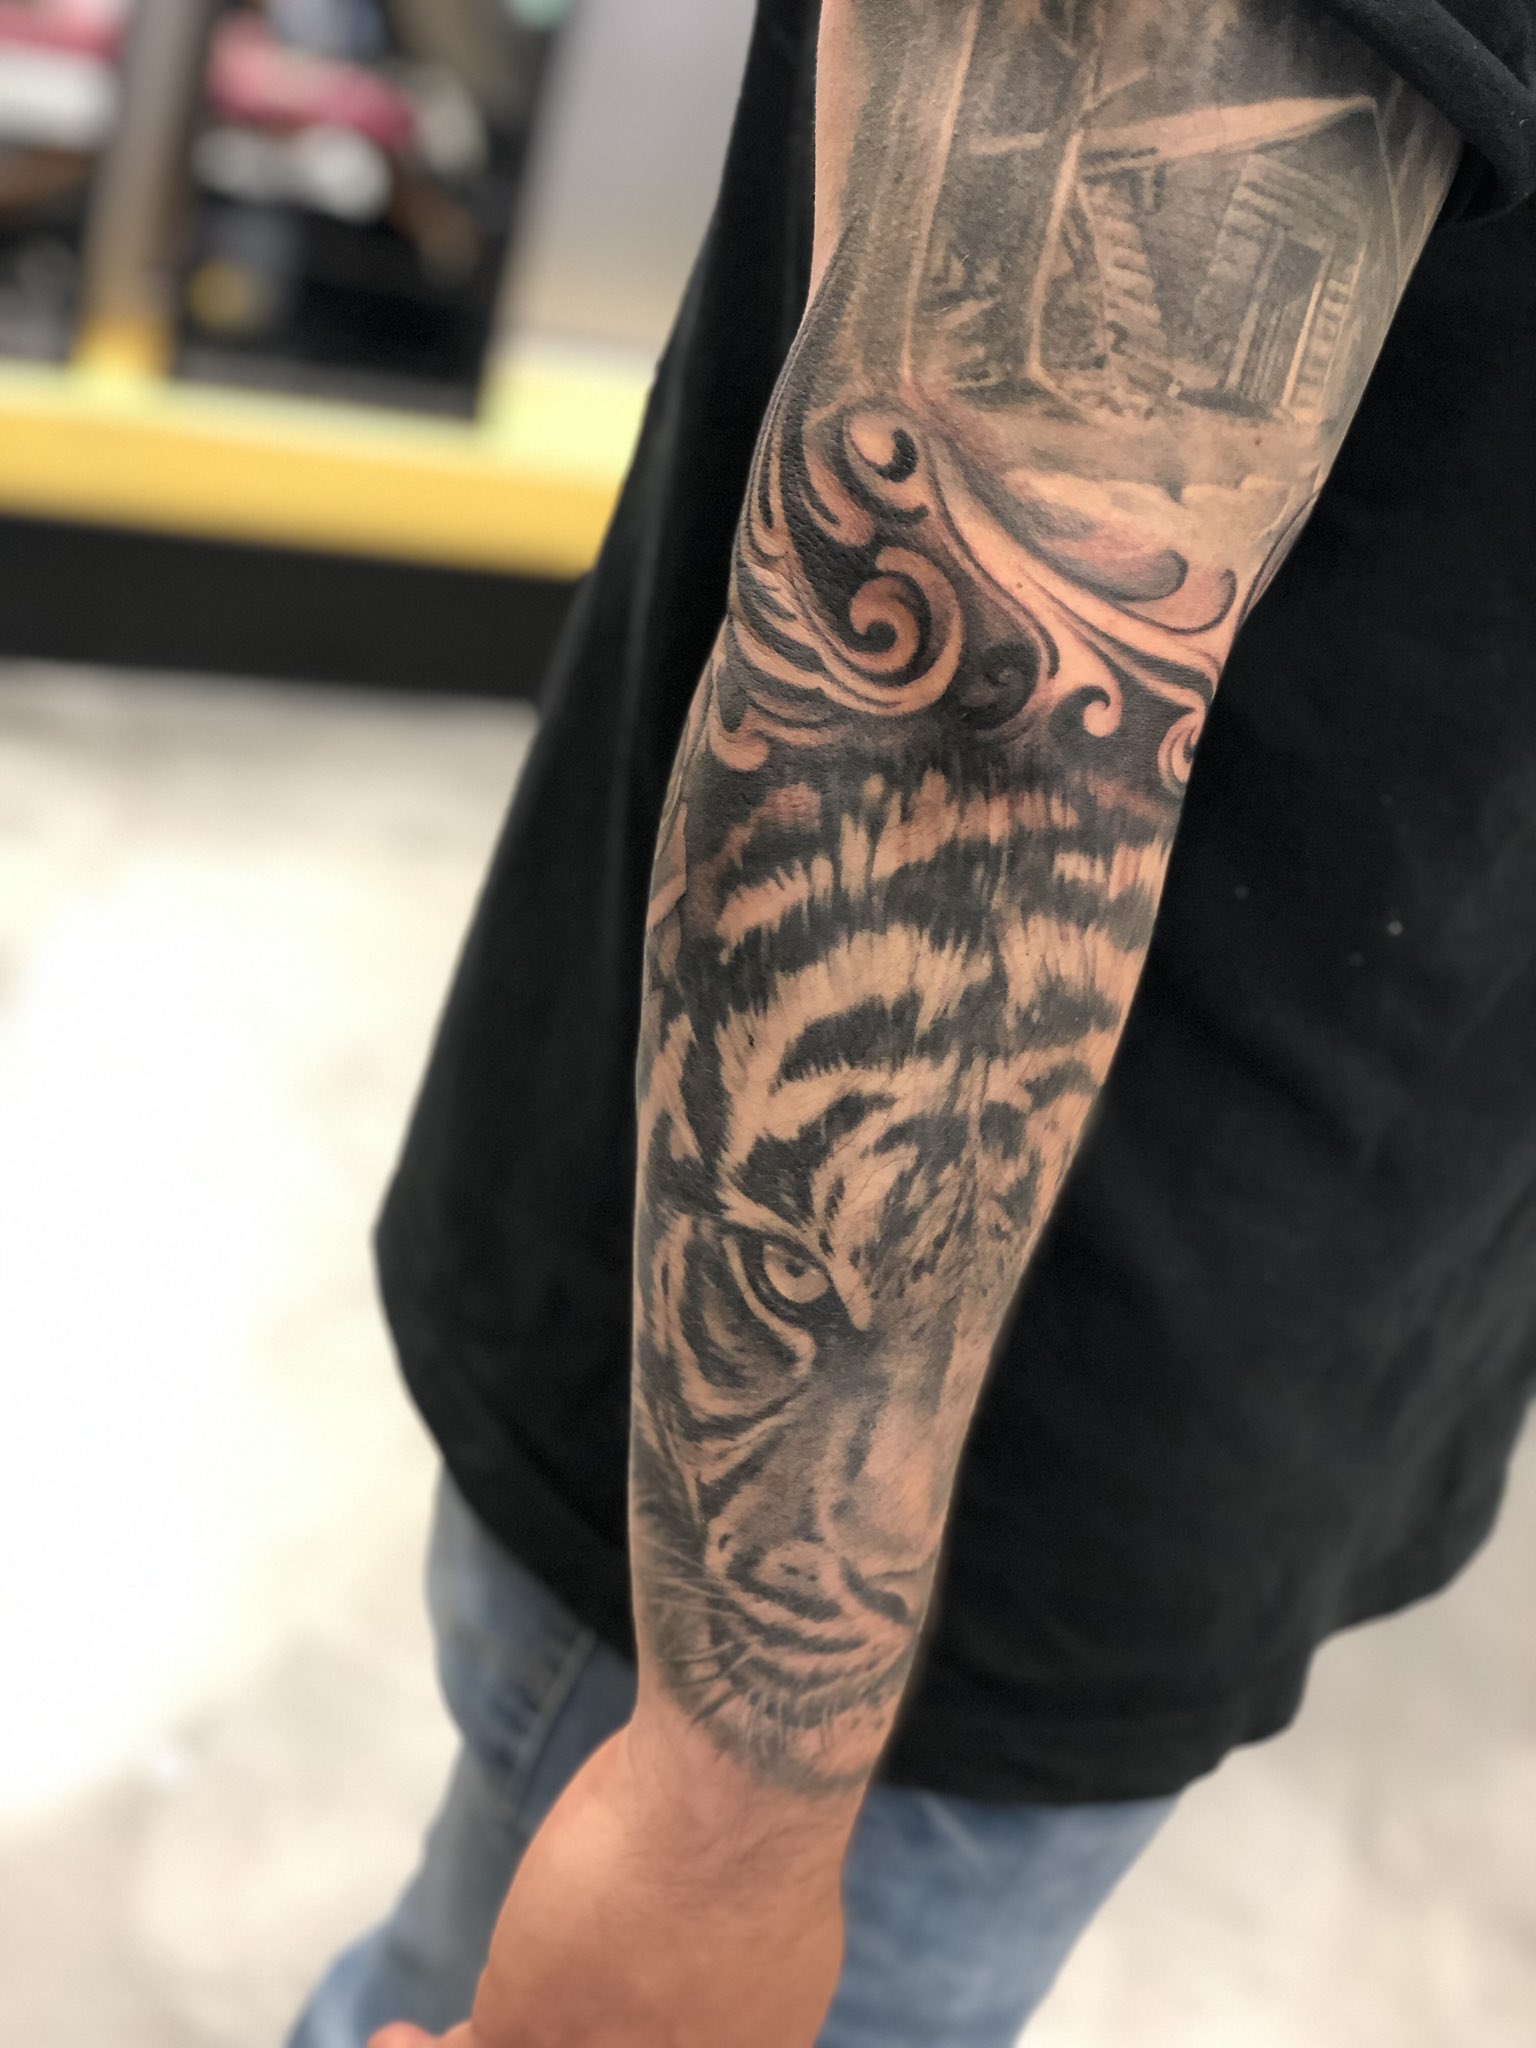 Forearm tiger tattoo 🐯 Artist: @yokaiink [At Off the Ground Ink, we bring  your tattoo… | Instagram